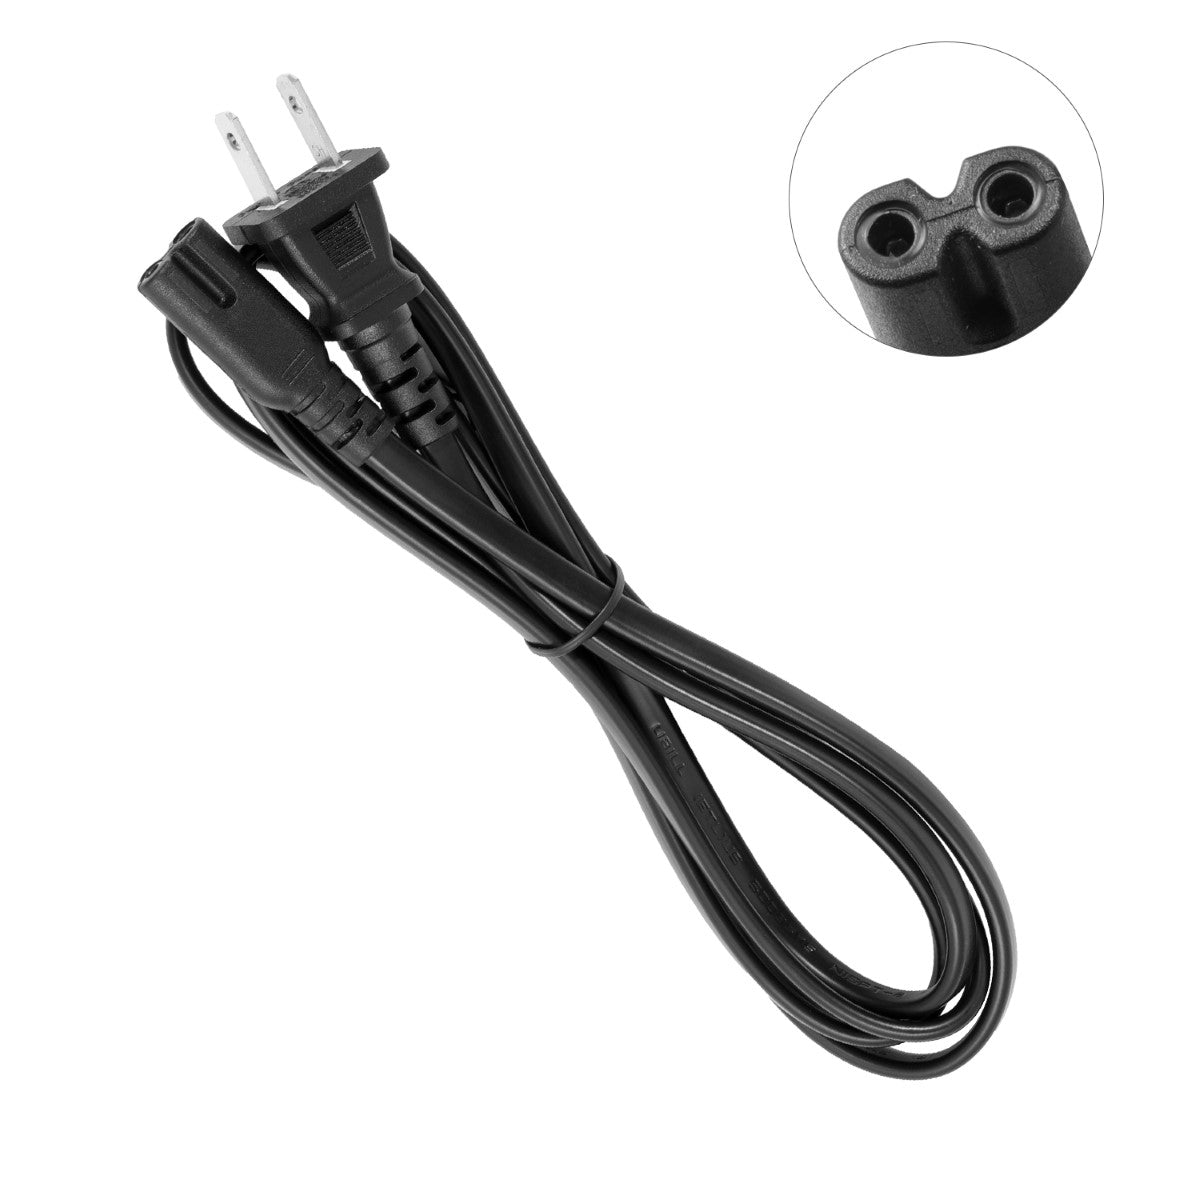 Power Cord for HP ENVY 5534 e-All-in-One Printer.